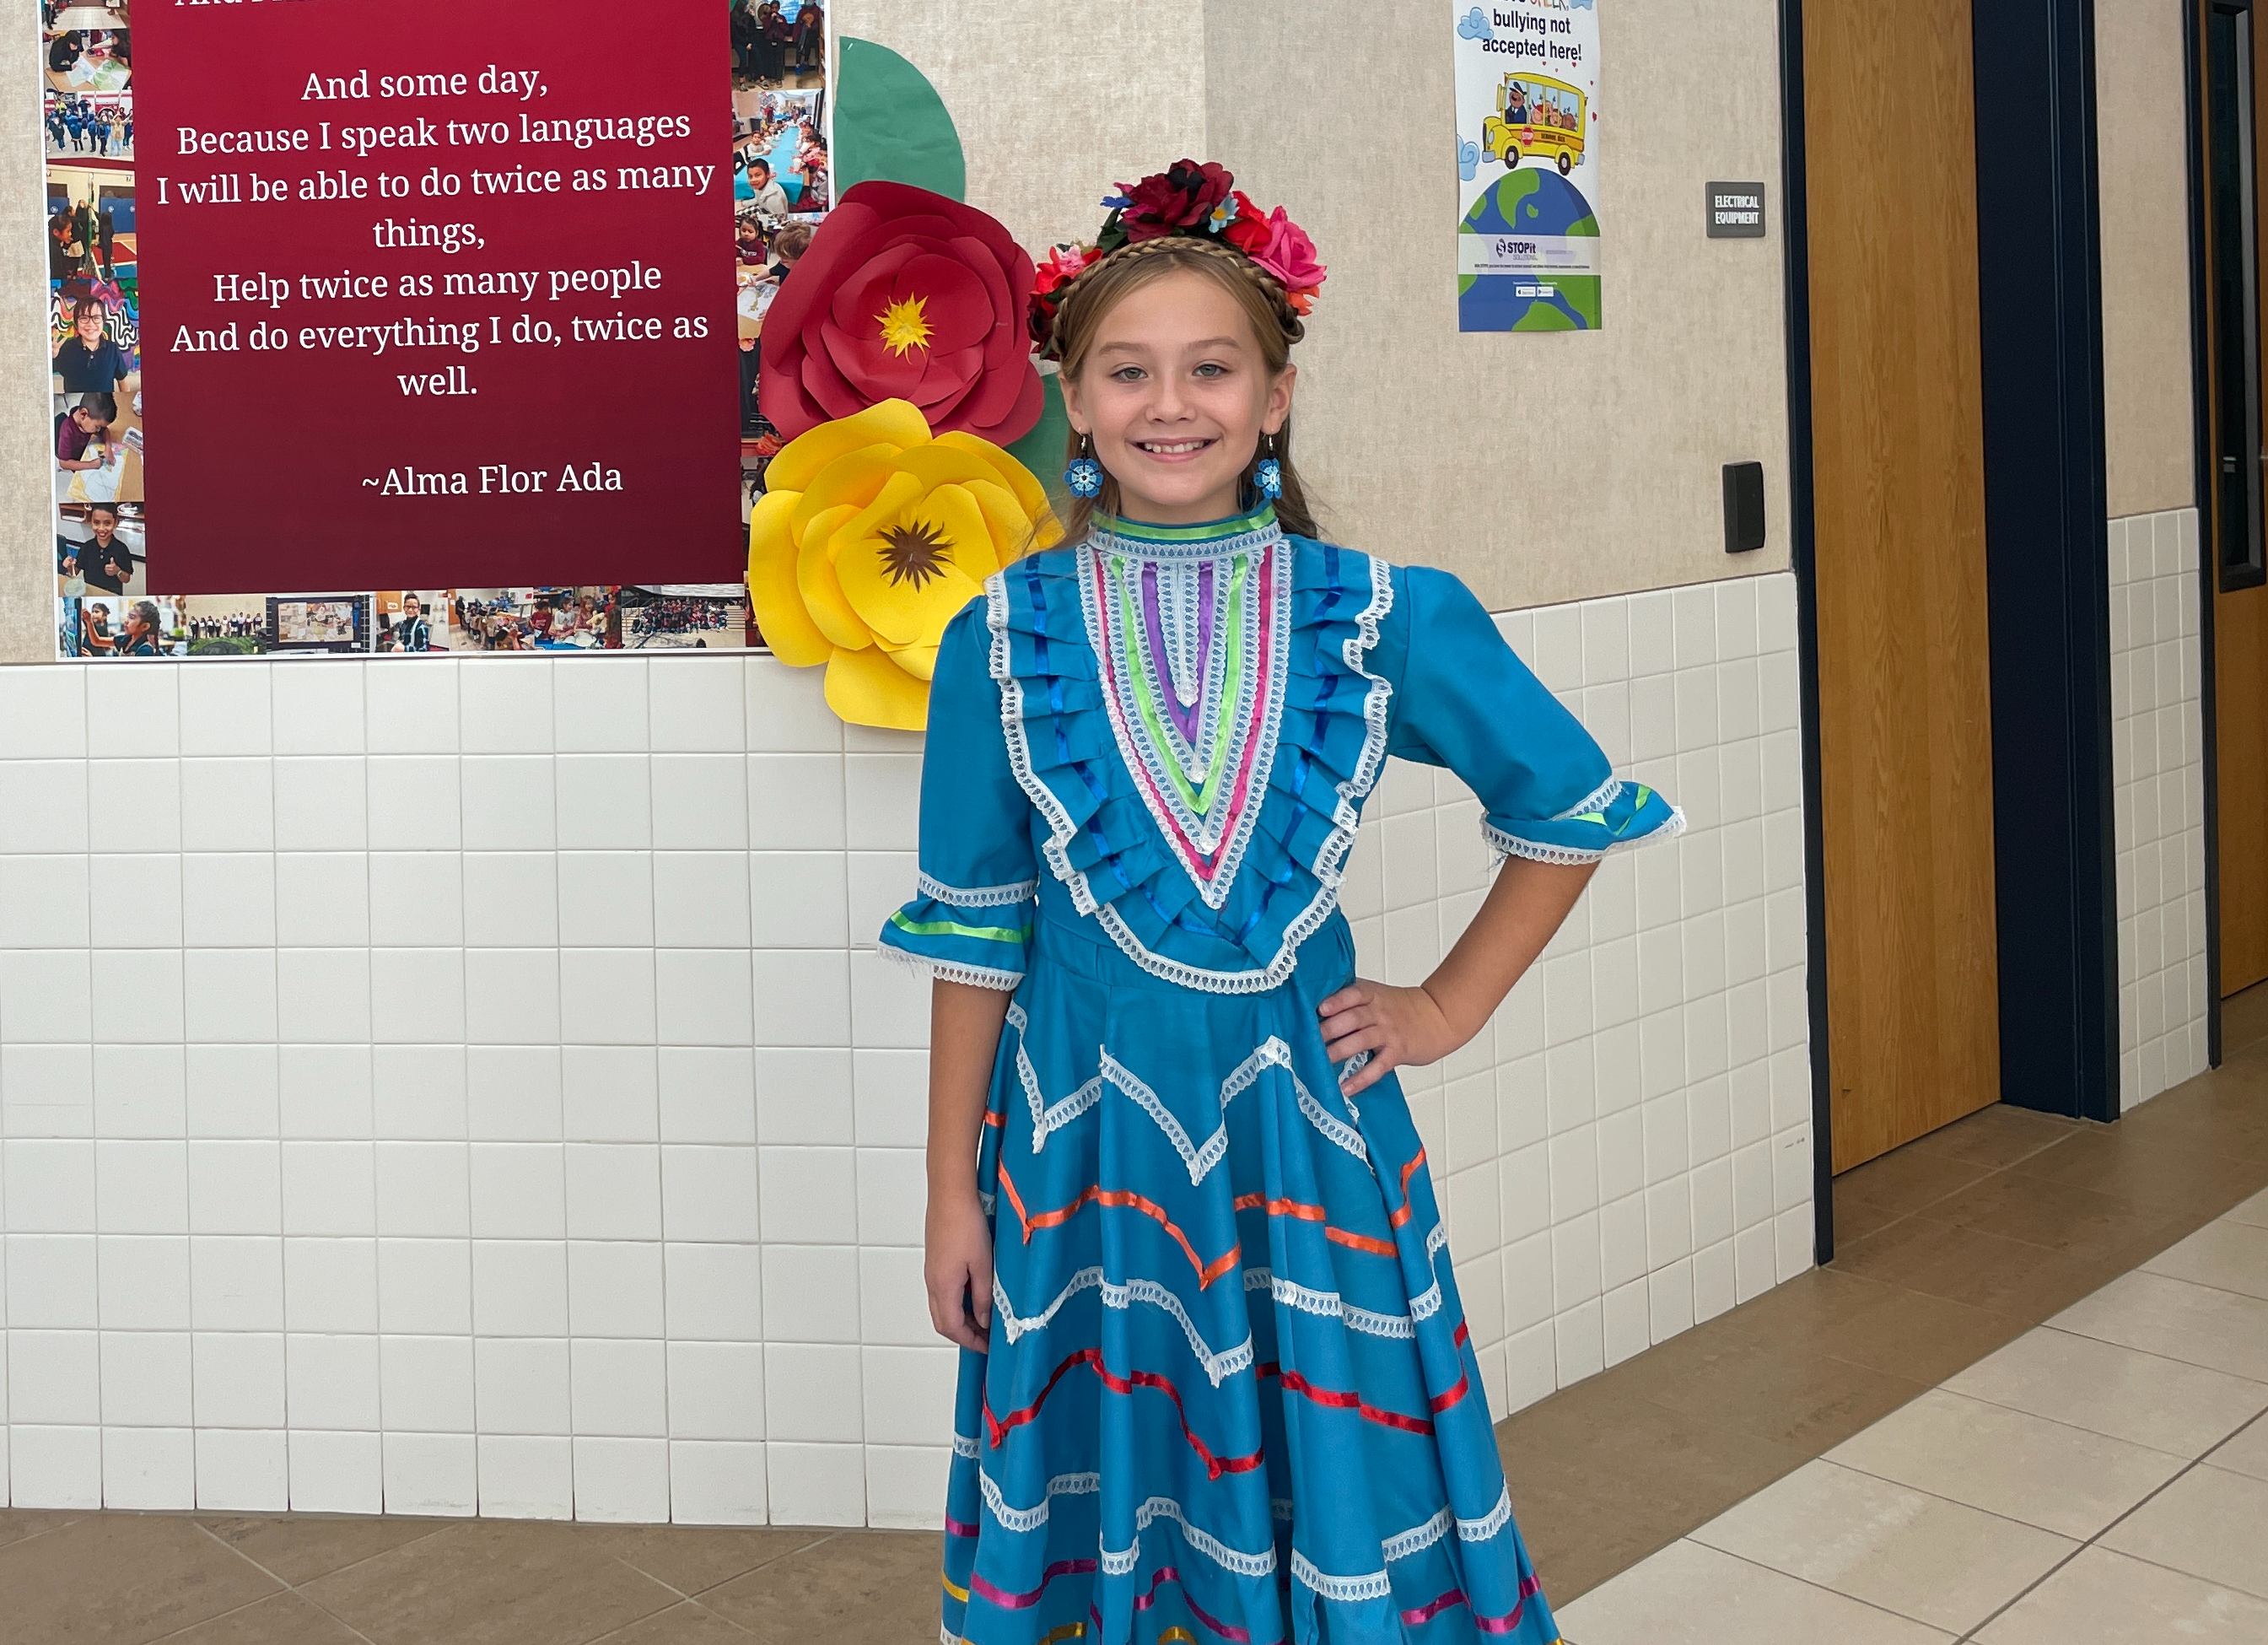 bilingual student in traditional dress